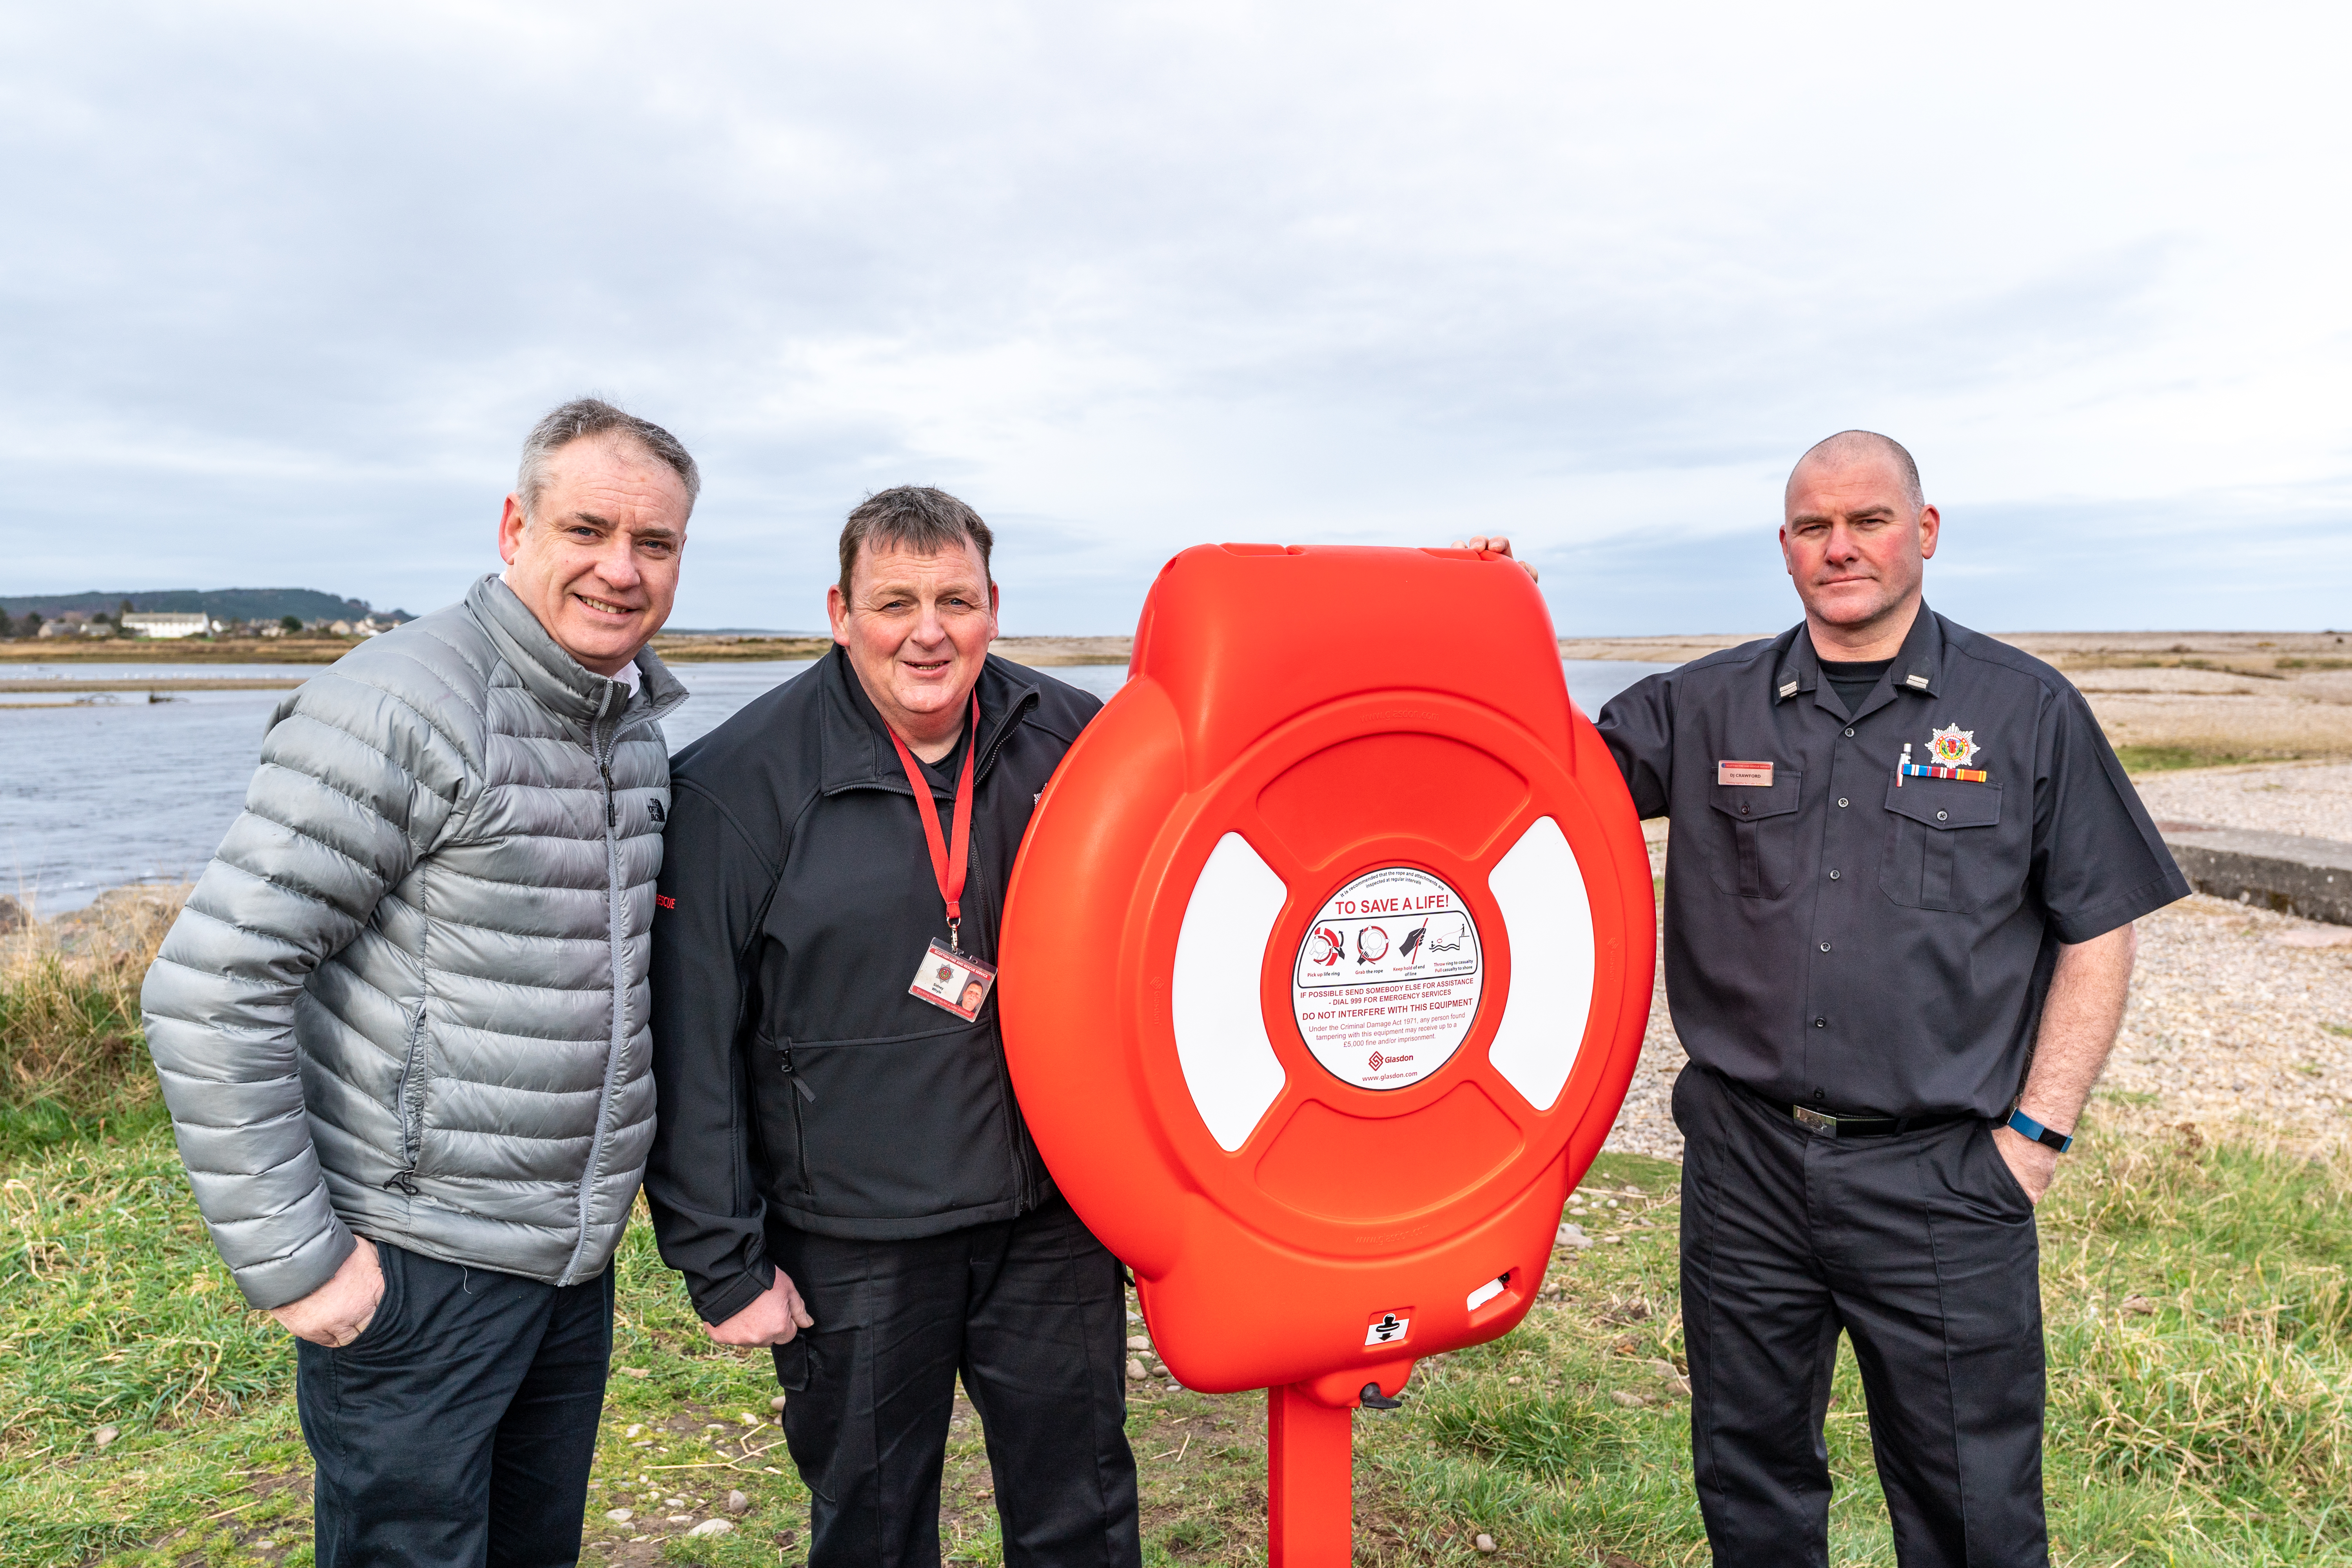 New lifesaving rings are installed at the mouth of the River Spey at Spey Bay following a joint project by fire station in Fochabers and Coastguard. (L-R) MSP Richard Lochhead, firefighter Sid Whyte and crew manager Dave Crawford of Fochabers Fire Station.